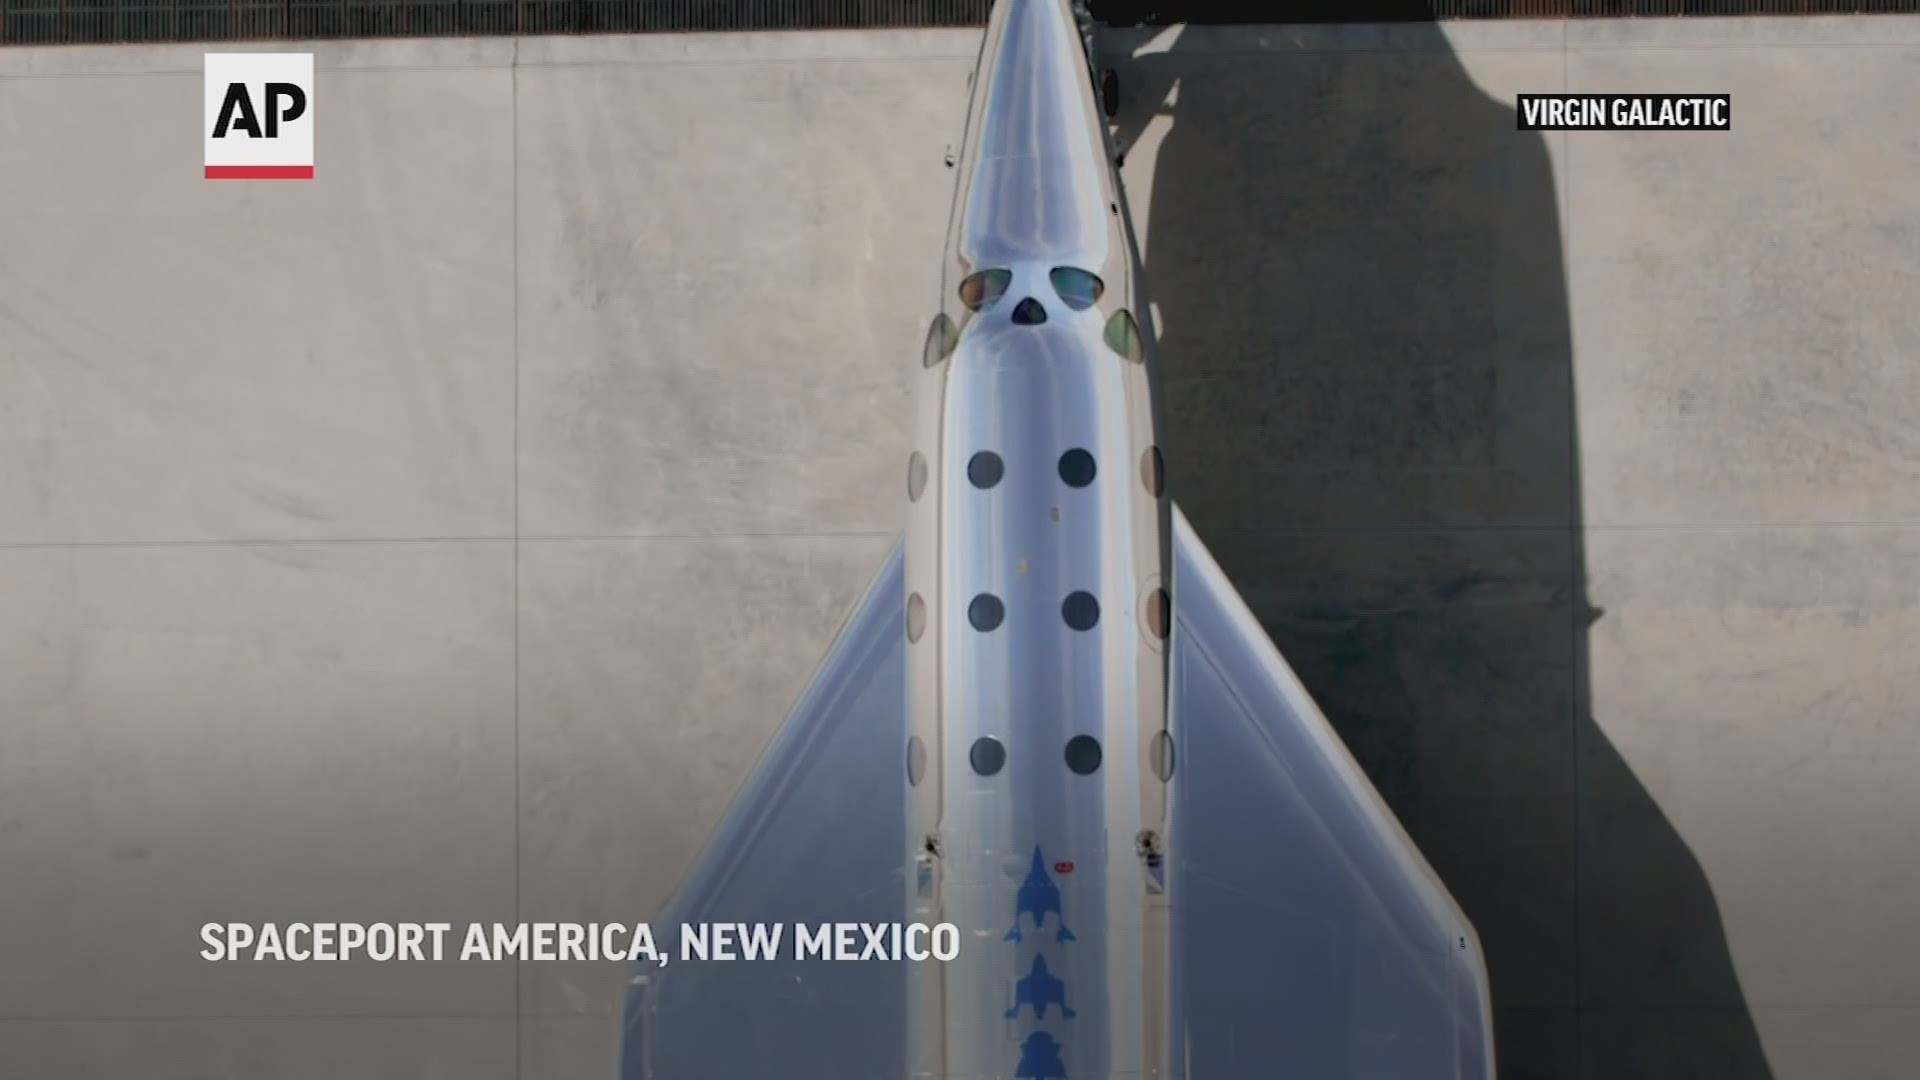 Virgin Galactic rolled out its newest spaceship as the company looks to resume test flights in the coming months at its headquarters in the New Mexico desert.